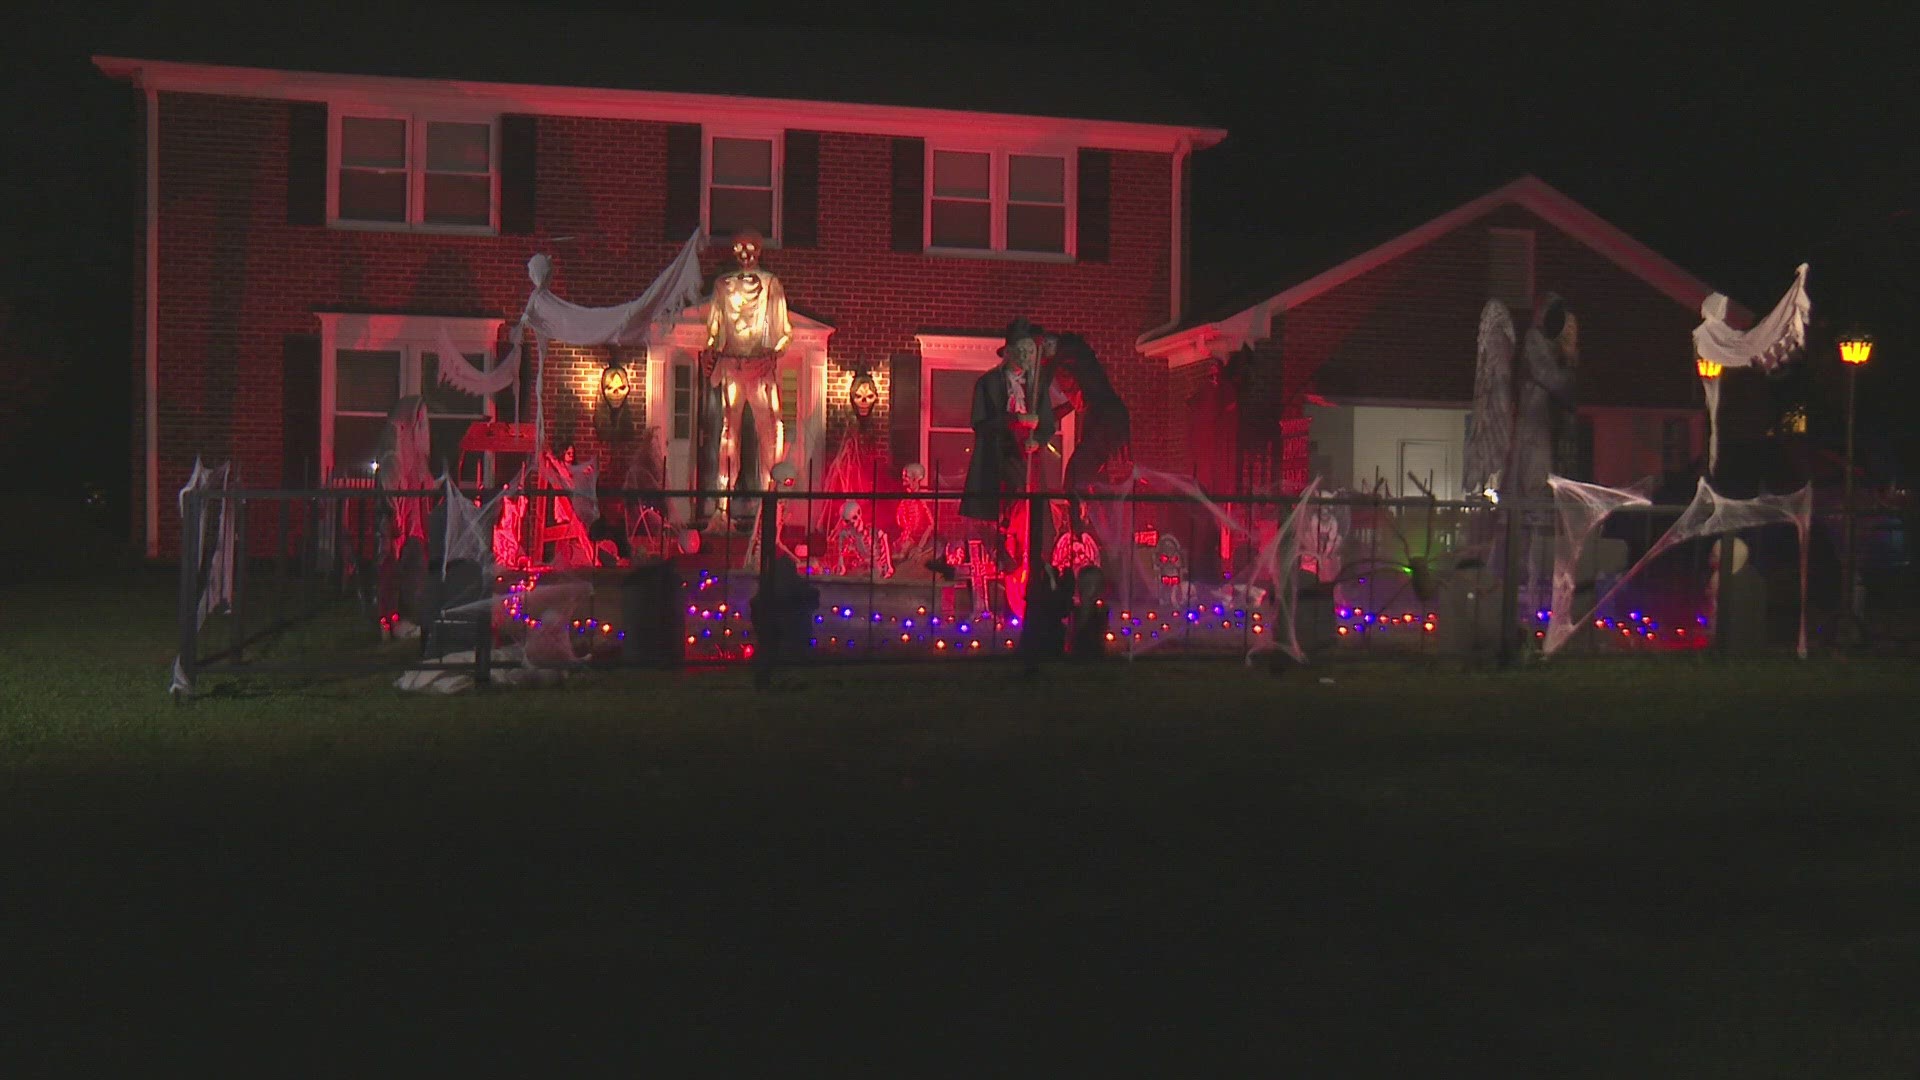 Our Favorite Halloween Decorations Spotted in the Charlotte Area